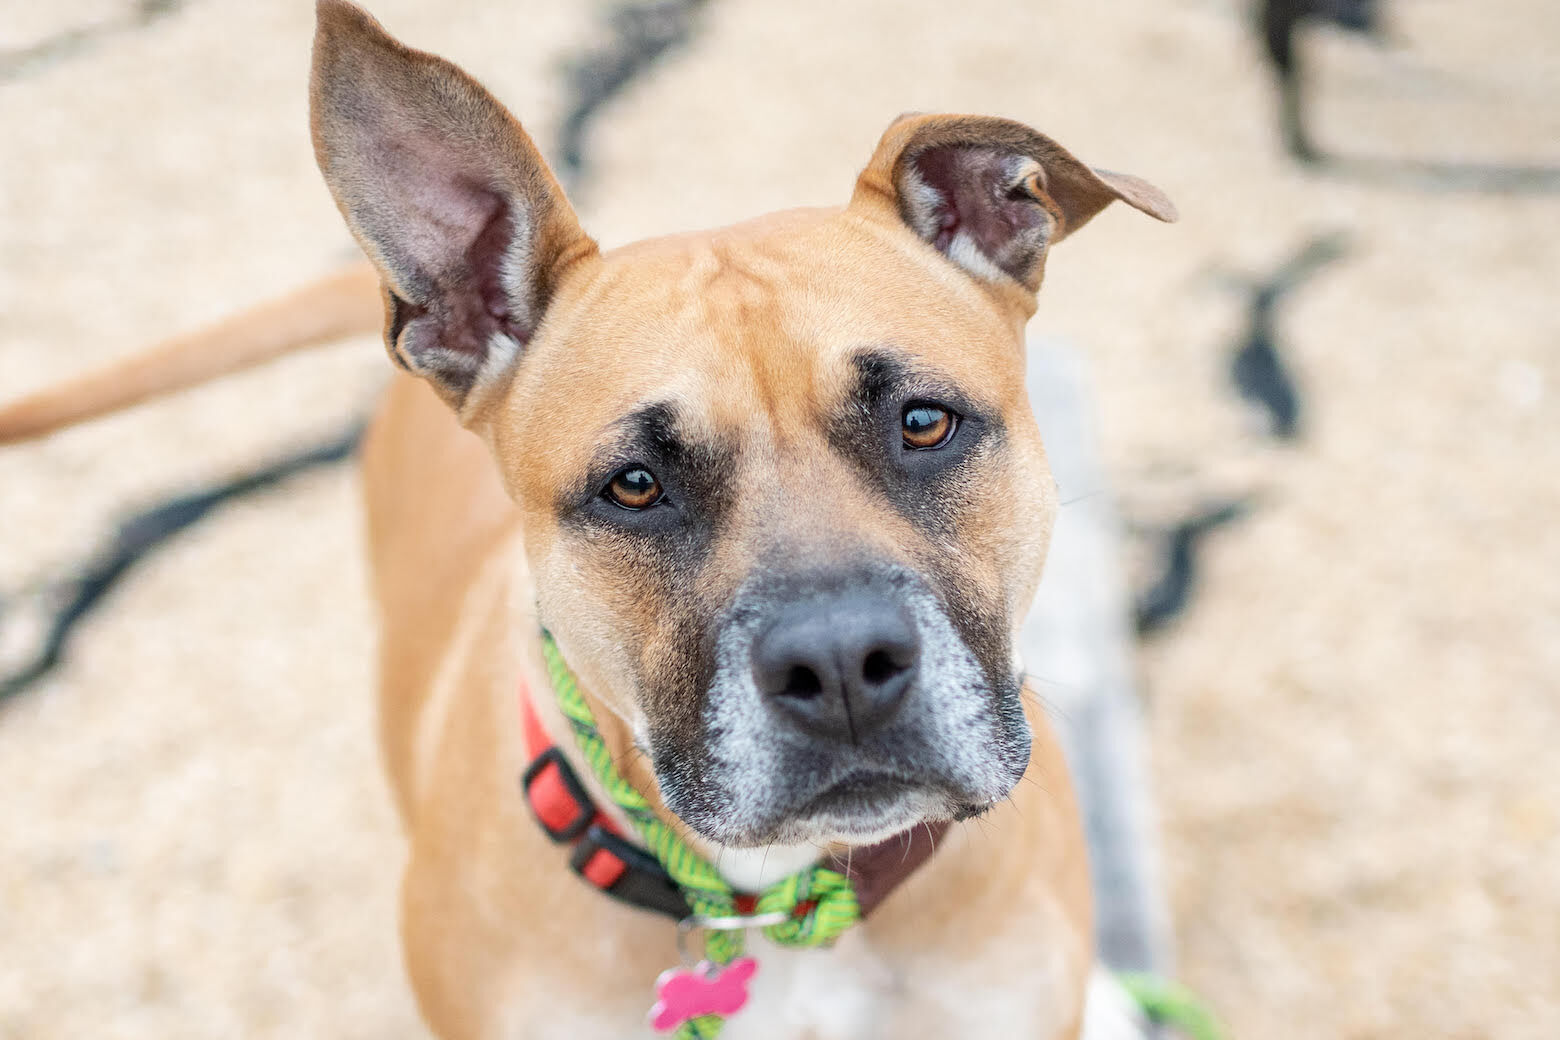 <p>Meet Rita!</p>
<p>Rita has never met a person she doesn’t love. She has quickly become best friends with everyone at the Humane Rescue Alliance after being found wandering the streets of D.C. on Christmas day.</p>
<p>As soon as she walked through our doors, her tail was wagging, her body was wiggling and she was leaning in to get pets from everyone who offered her a head scratch or belly rub.</p>
<p>At six years old, Rita is well past her puppy days but enjoys getting outside for walks and exploring. She also likes to say hello to other dogs who are gentle and mellow.</p>
<p>To learn more about this darling girl at <a href="https://www.humanerescuealliance.org/adopt" target="_blank" rel="noopener">humanerescuealliance.org/adopt</a>.</p>
